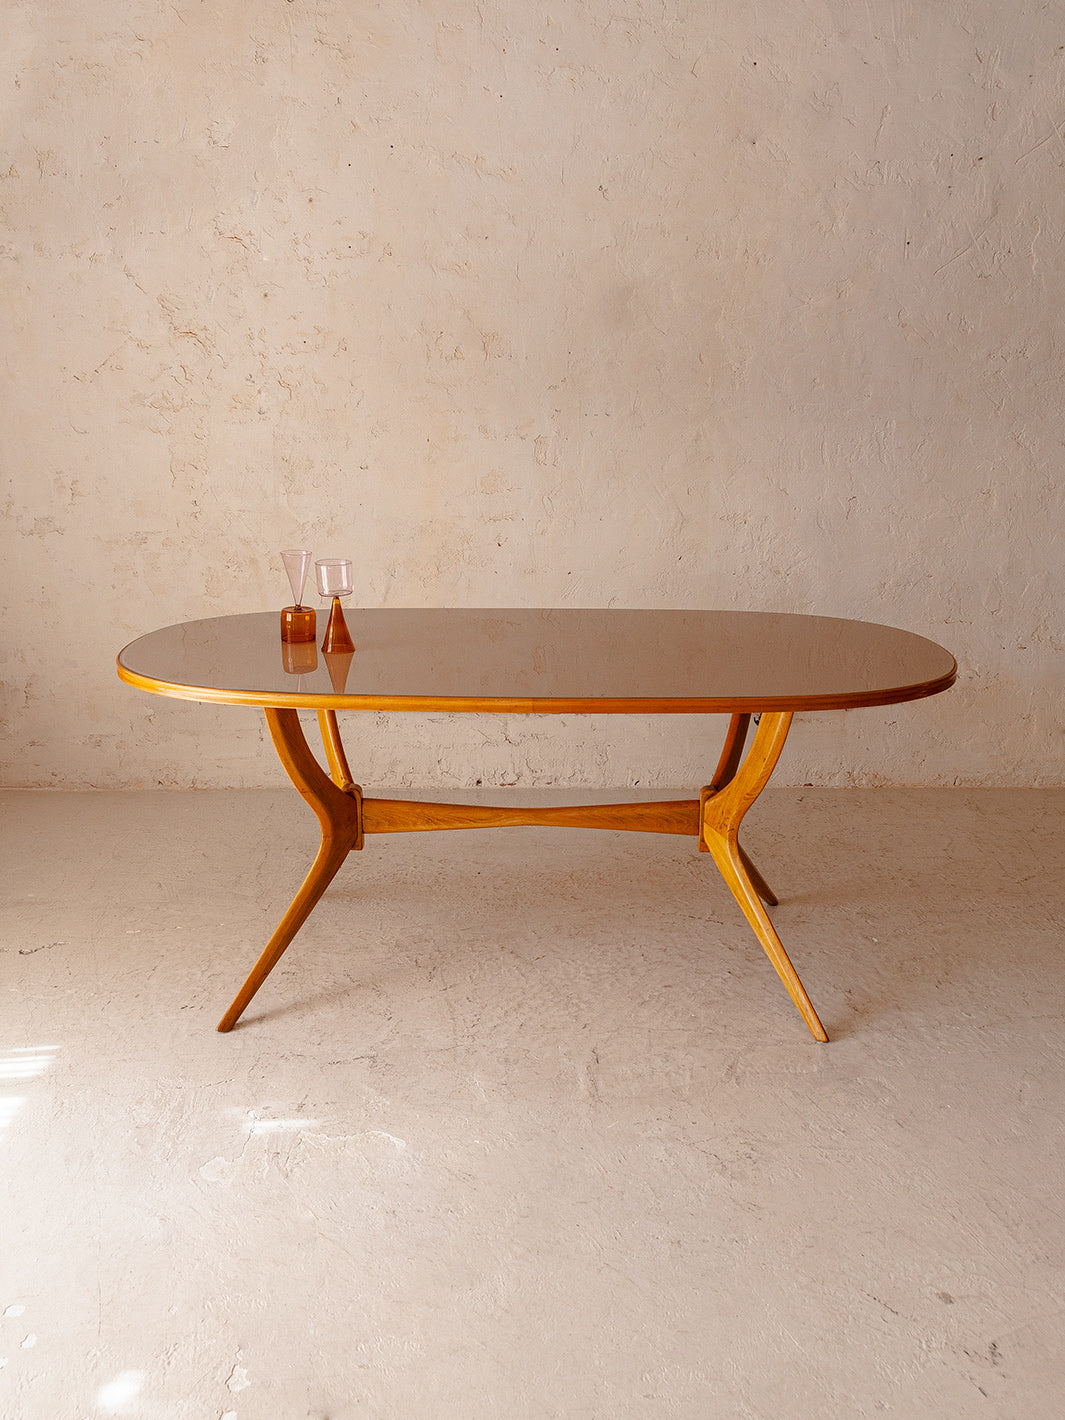 Italian table from the 50s with nude glass 178cmx80cm